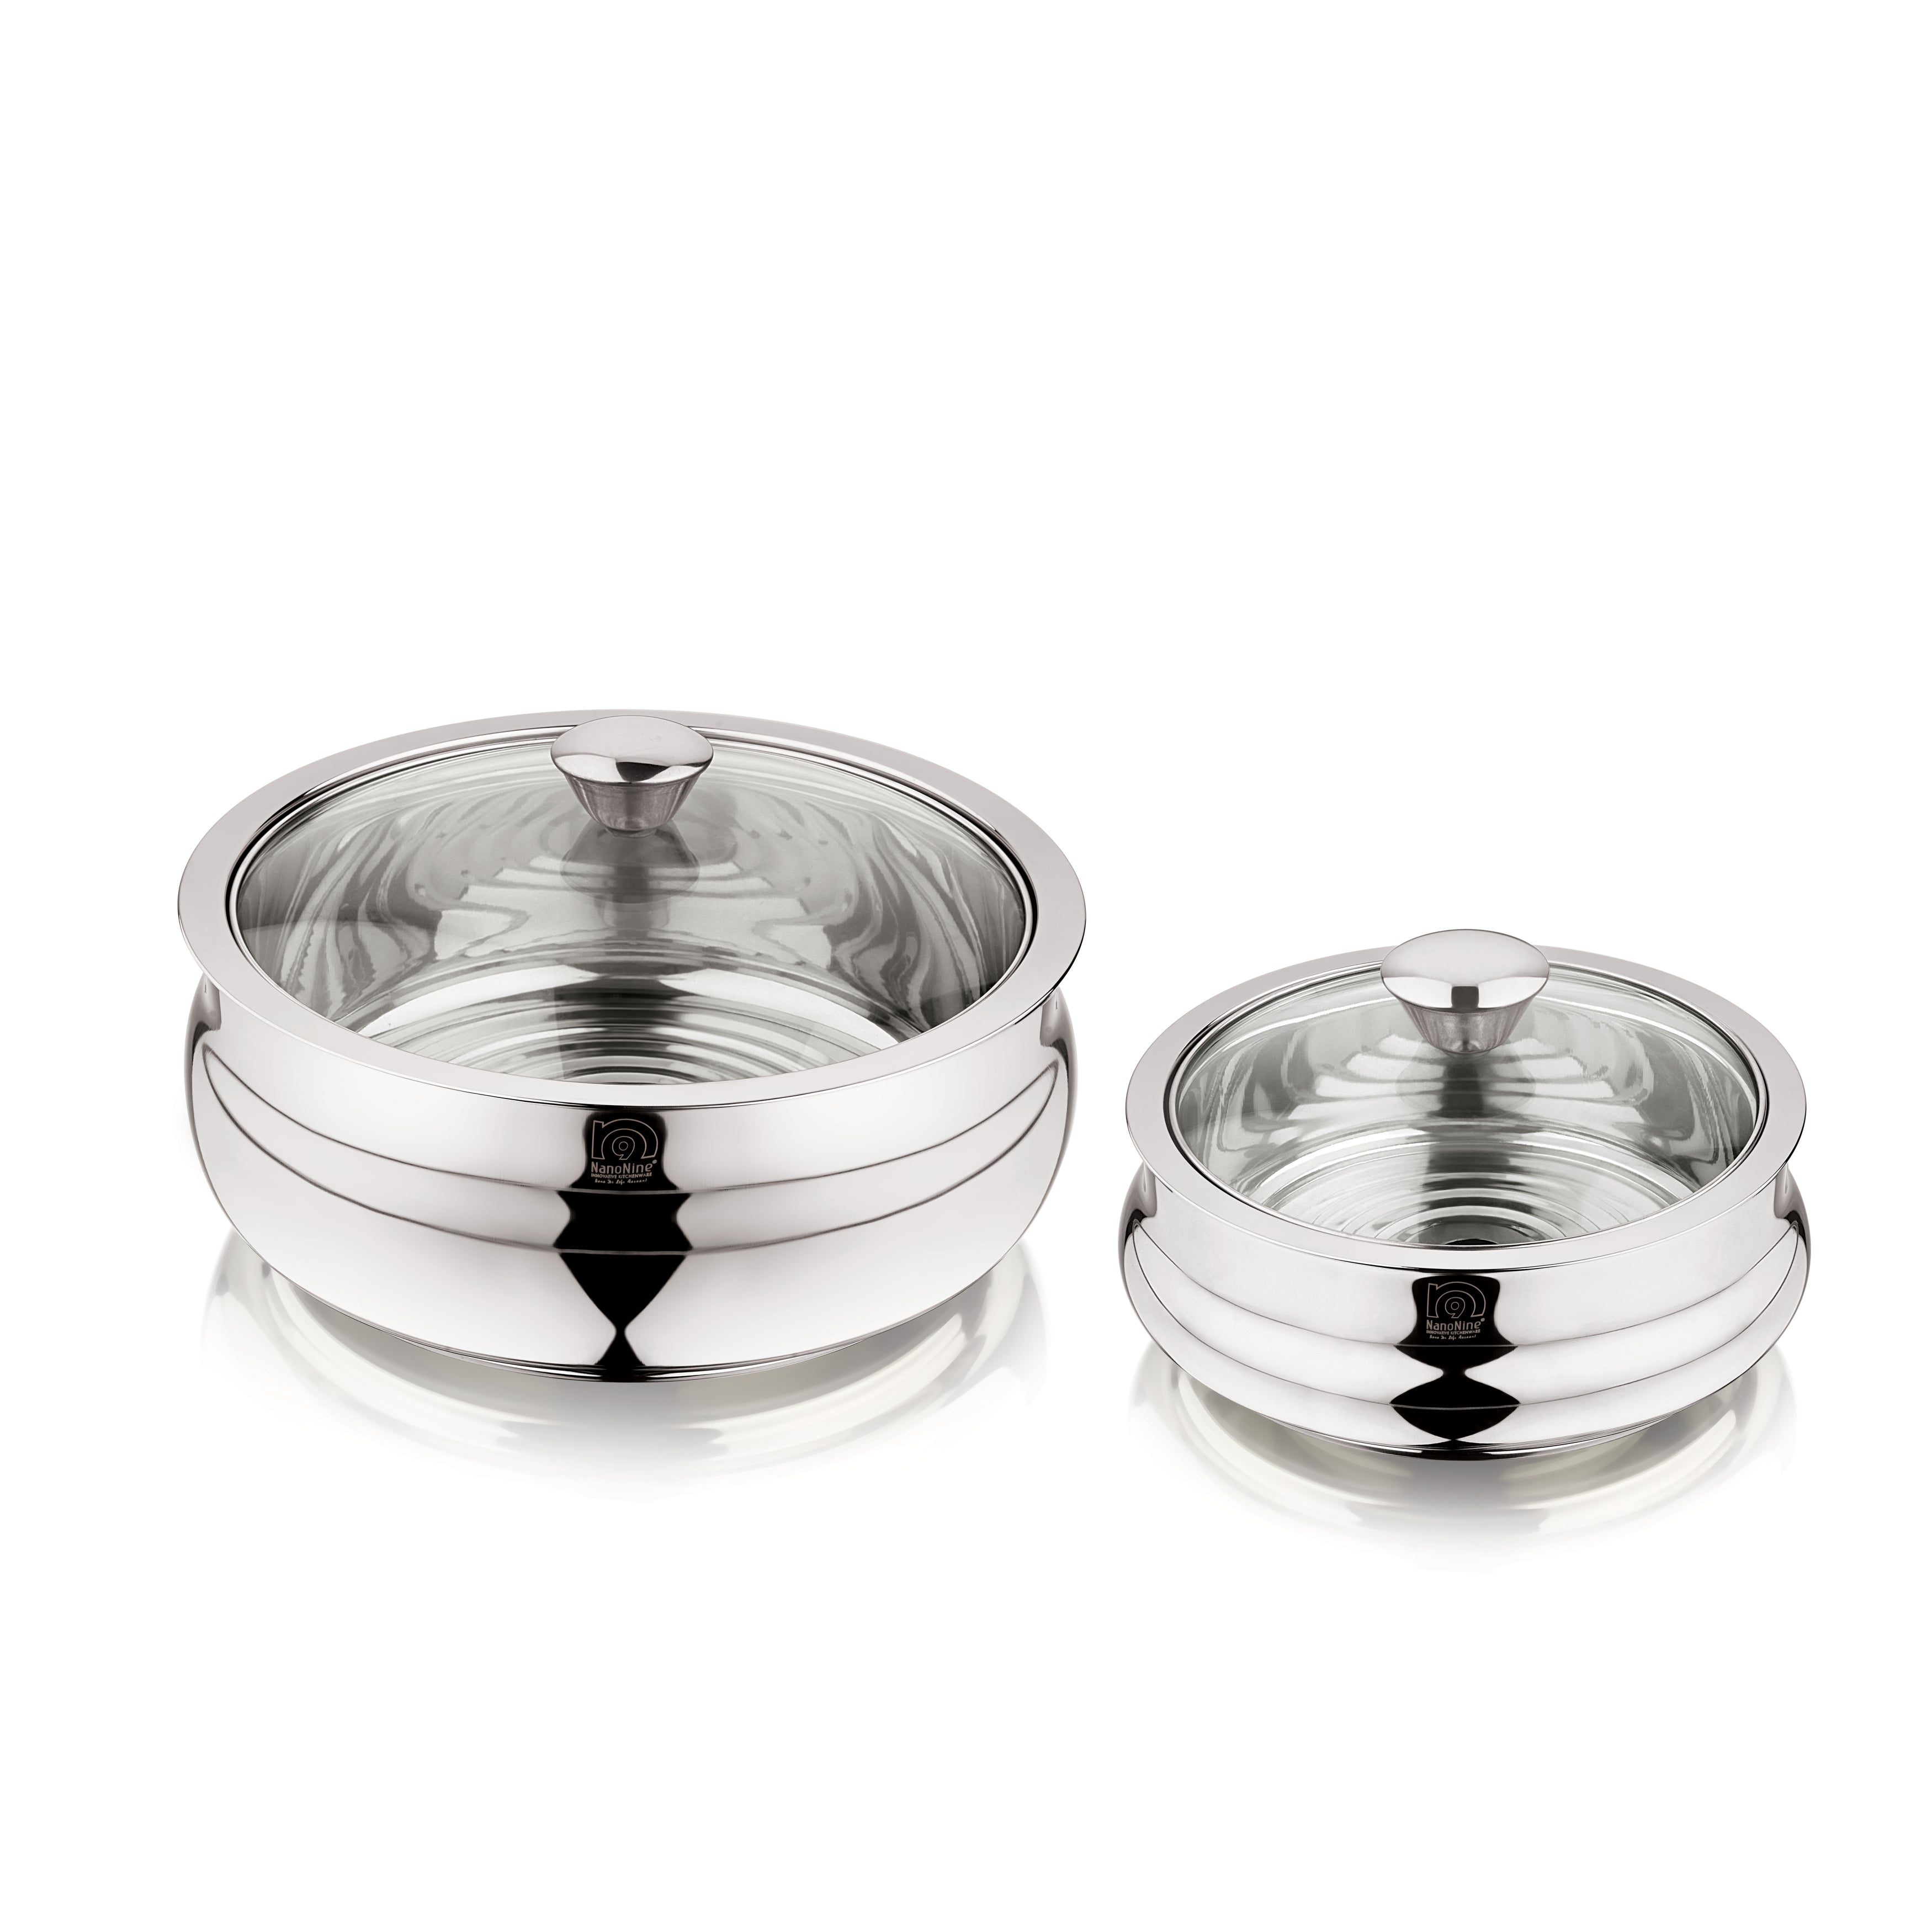 NanoNine Bellyno Gift Set No.1 Double Wall Insulated Stainless Steel Serve Fresh Casserole with Glass Lid.